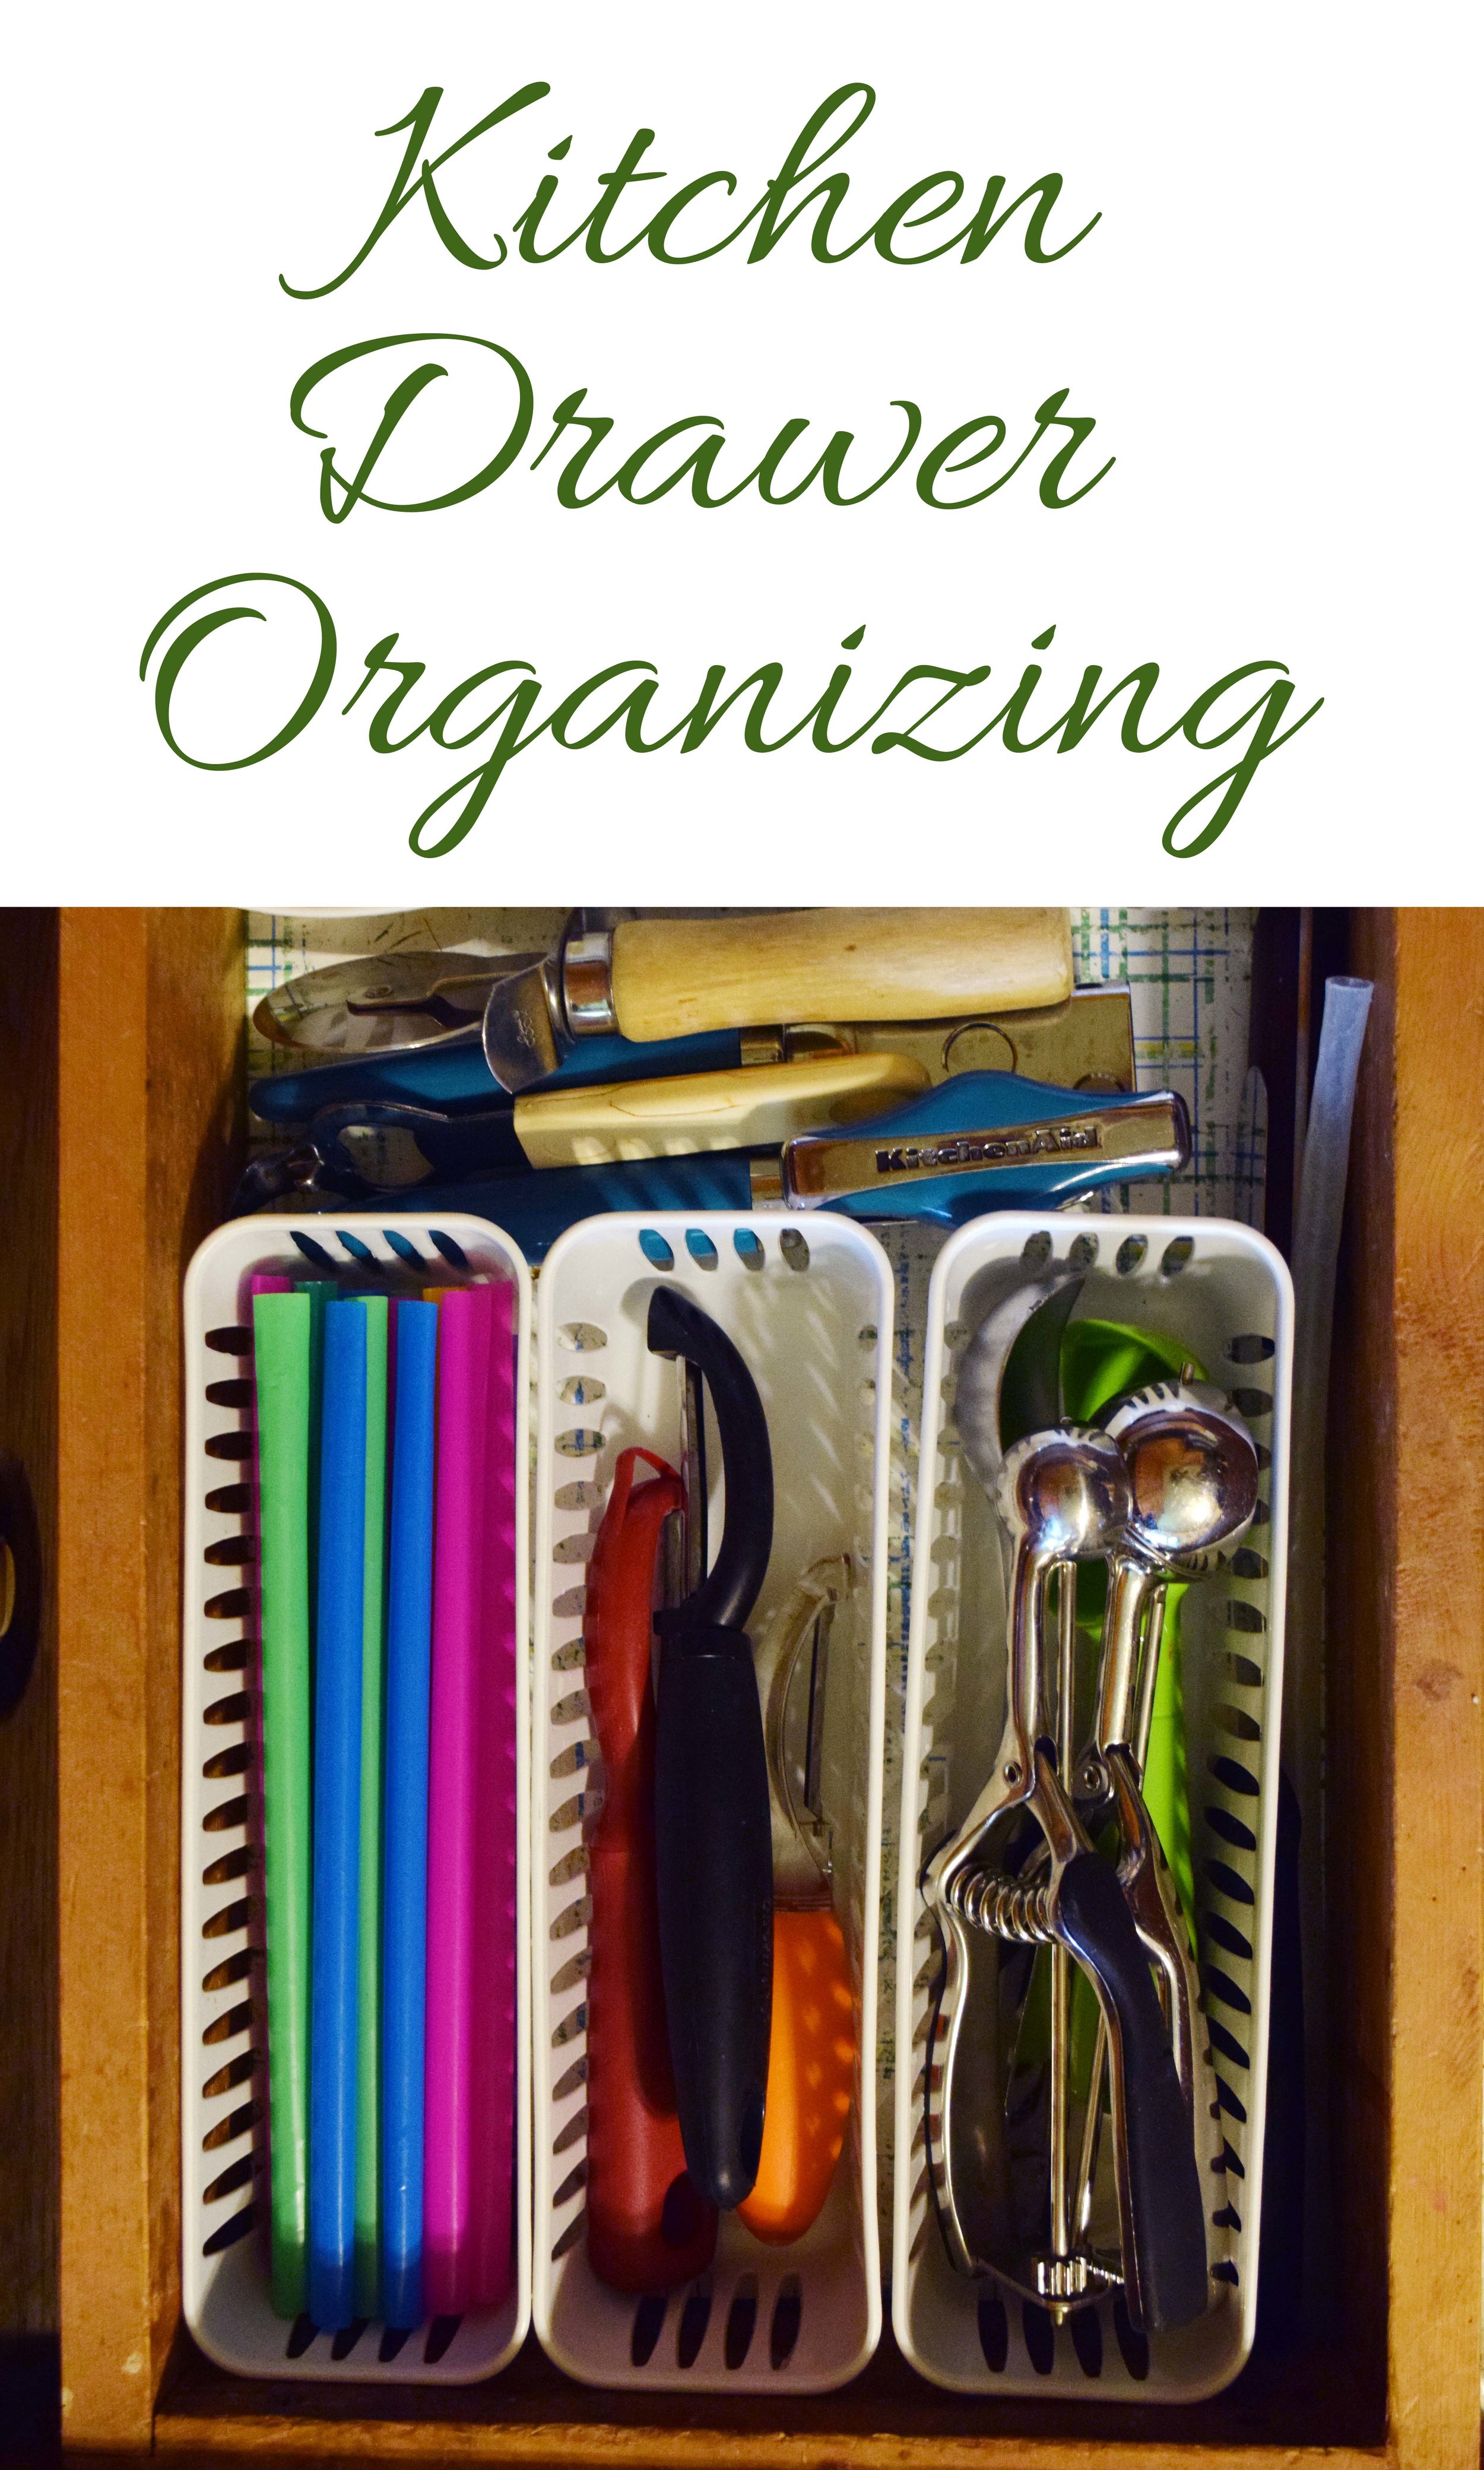 How to declutter and organize your kitchen drawers.